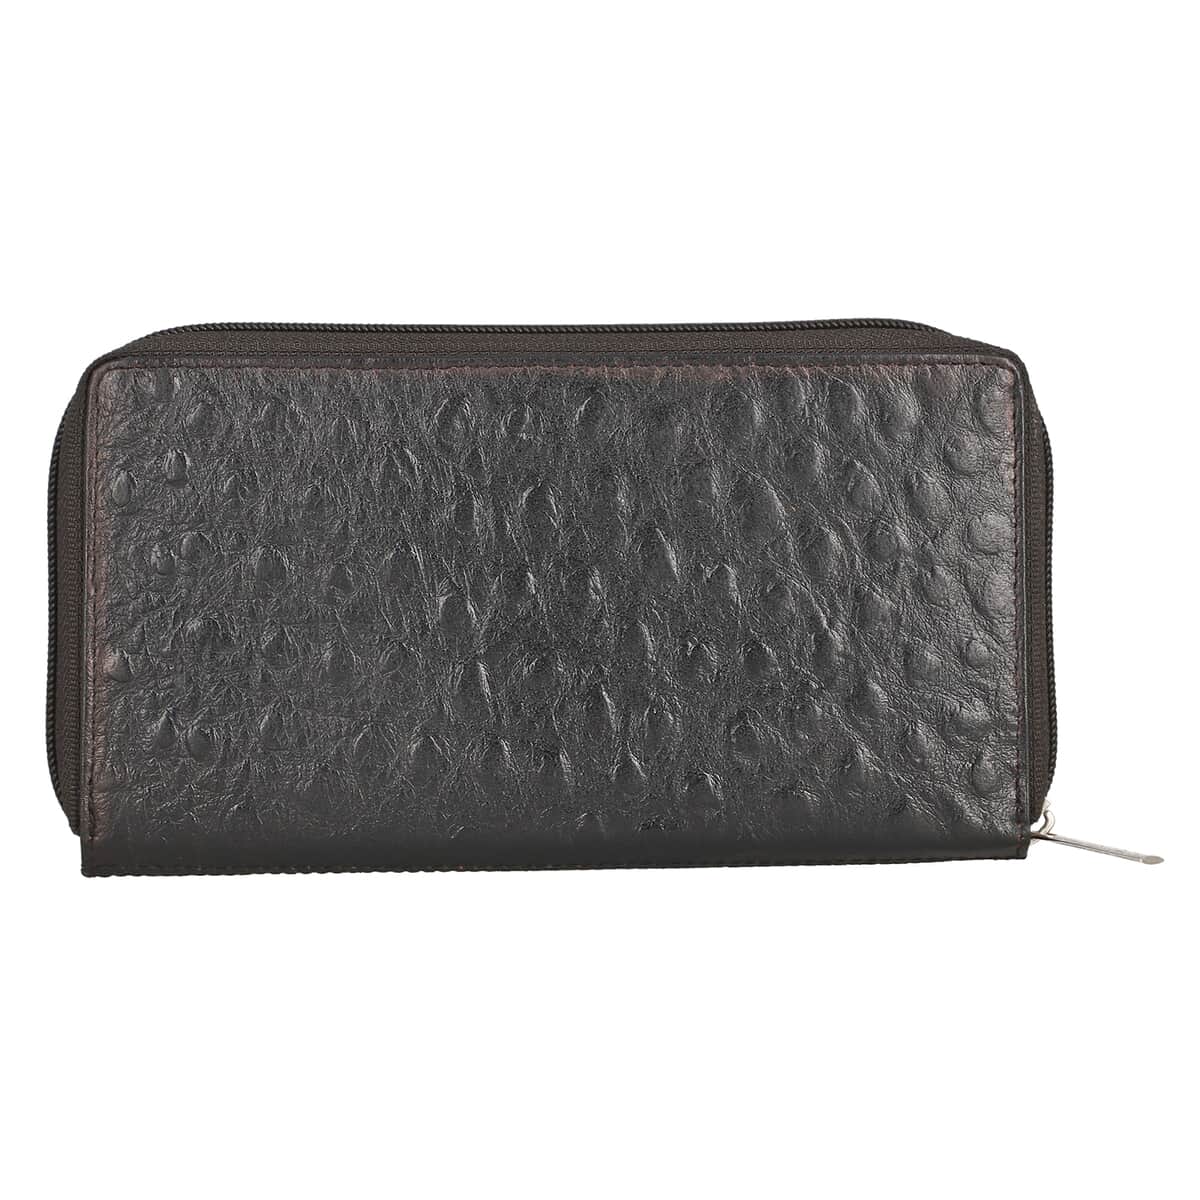 Union Code Black Genuine Leather Ostrich Embossed RFID Protected Women's Wallet image number 4